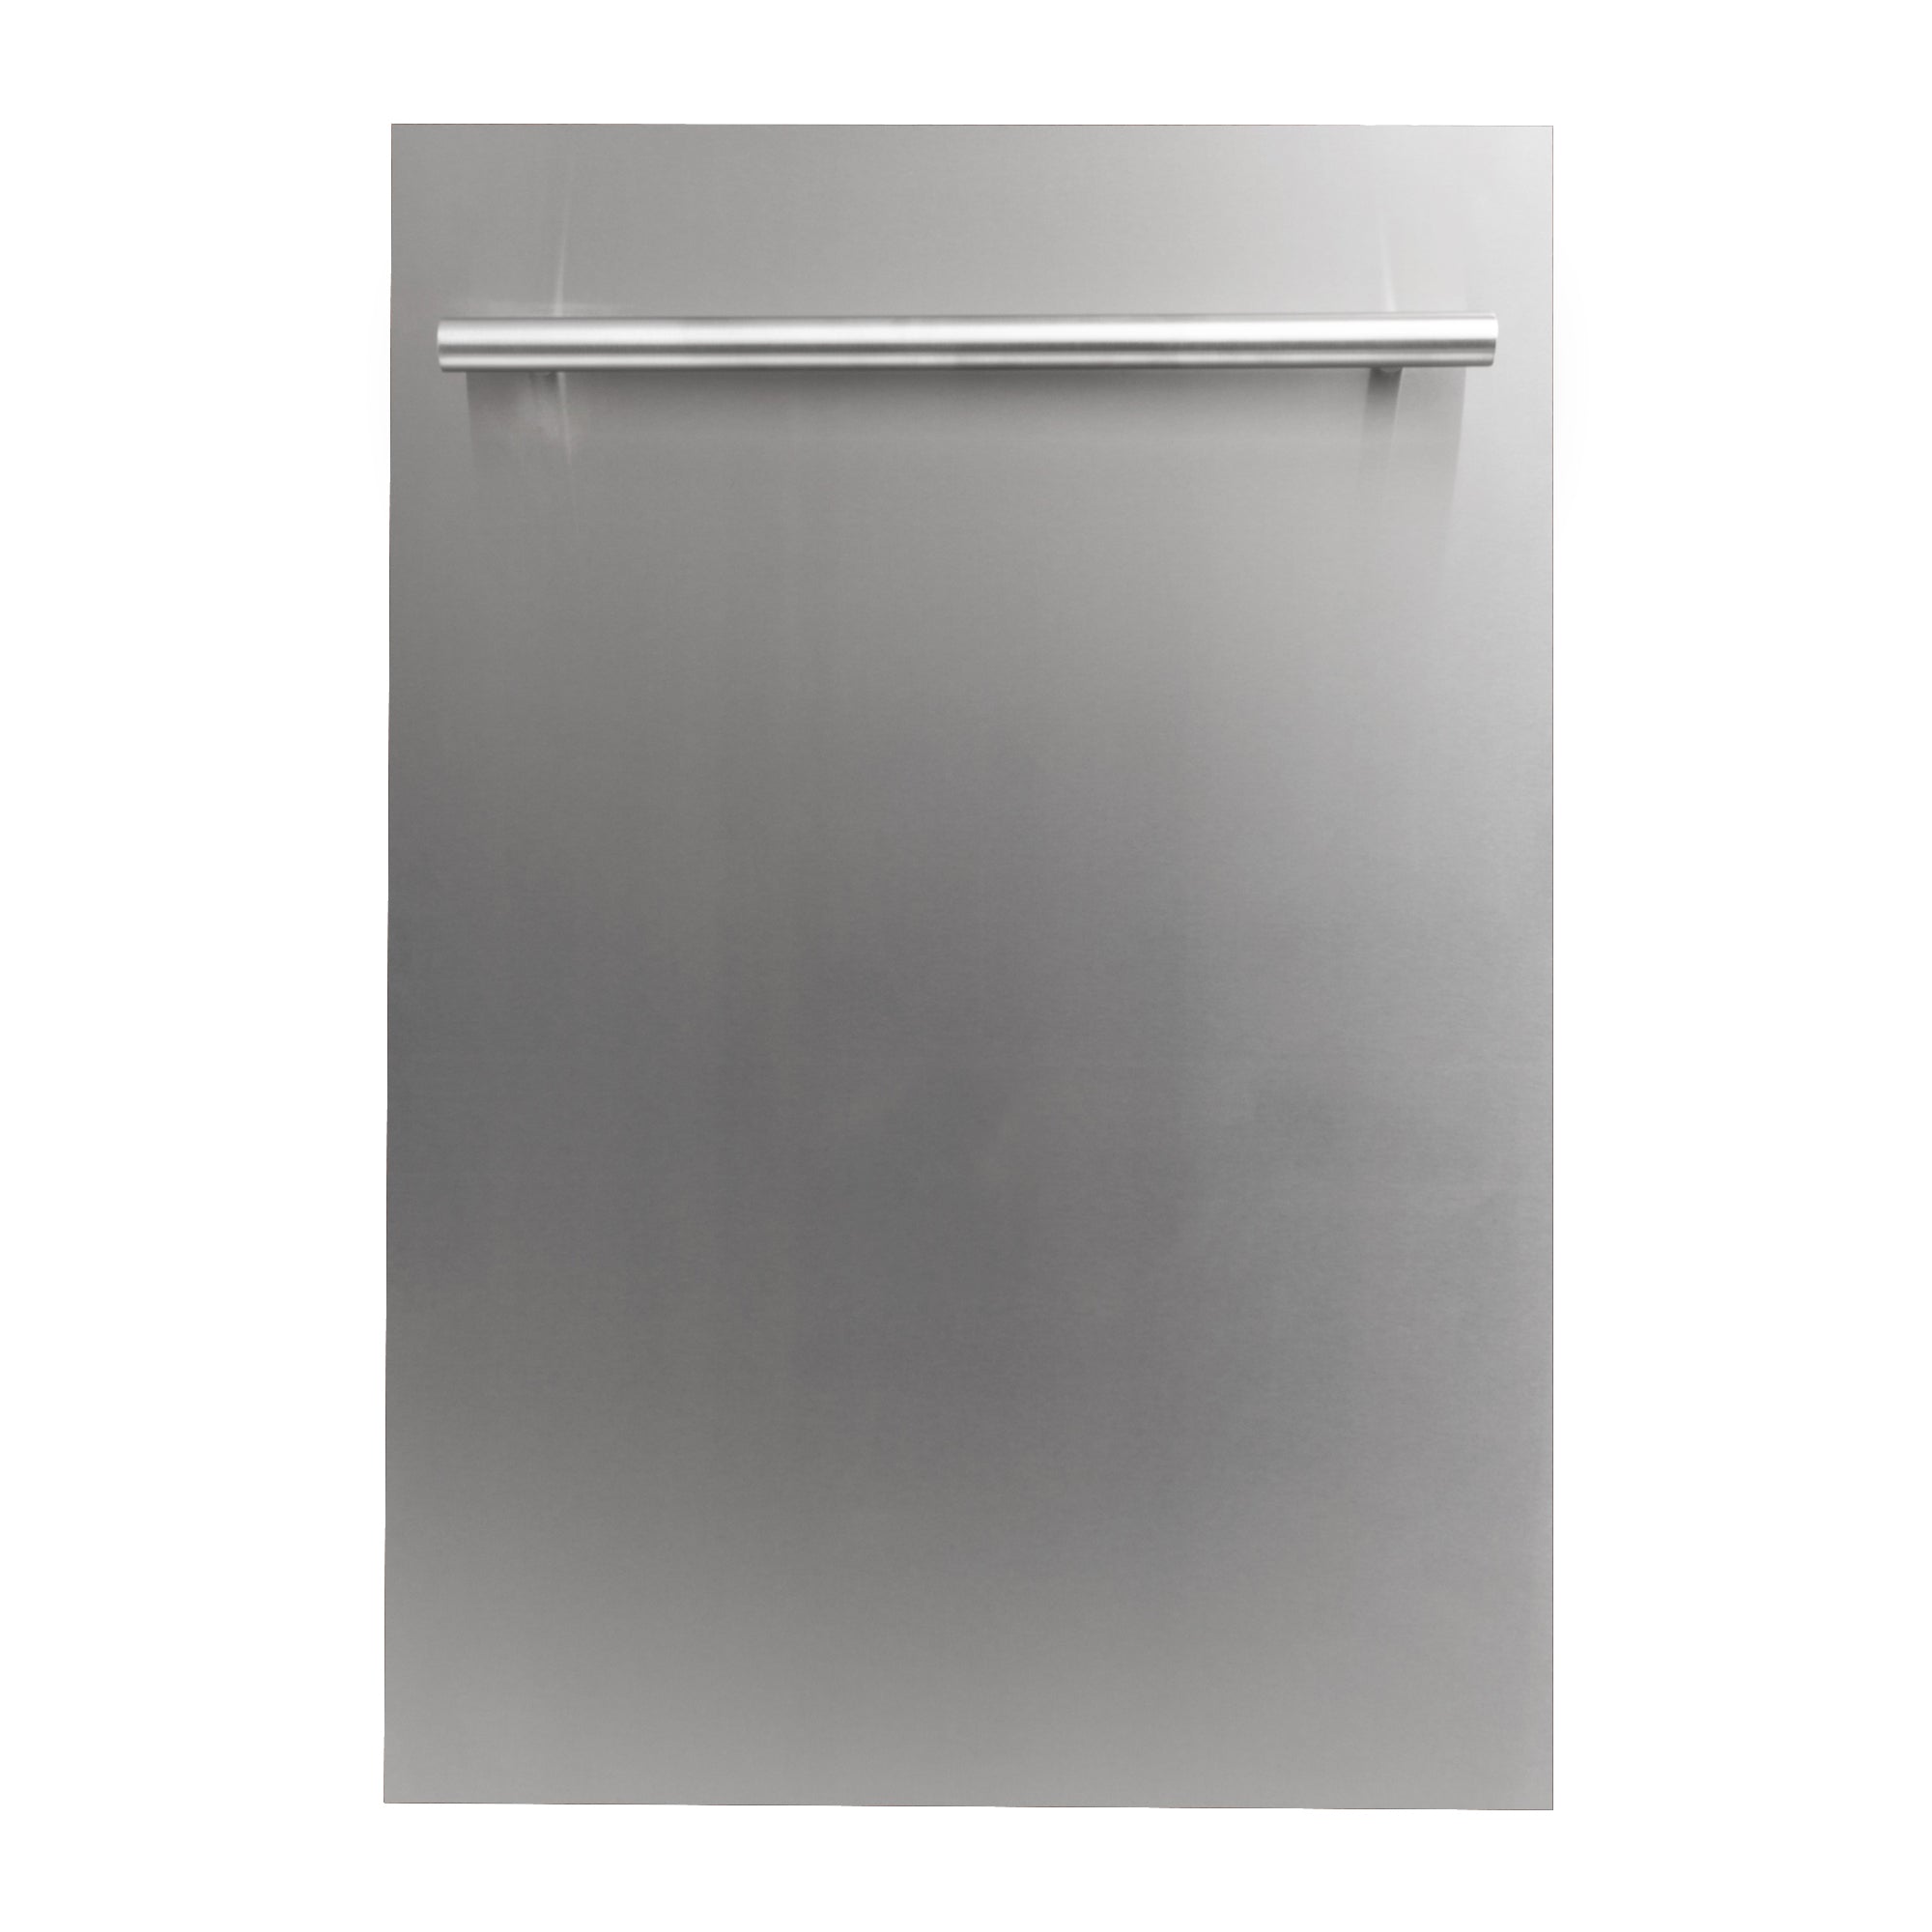 ZLINE 18" Dishwasher Panel in Stainless Steel with Modern Handle (DP-304-18)